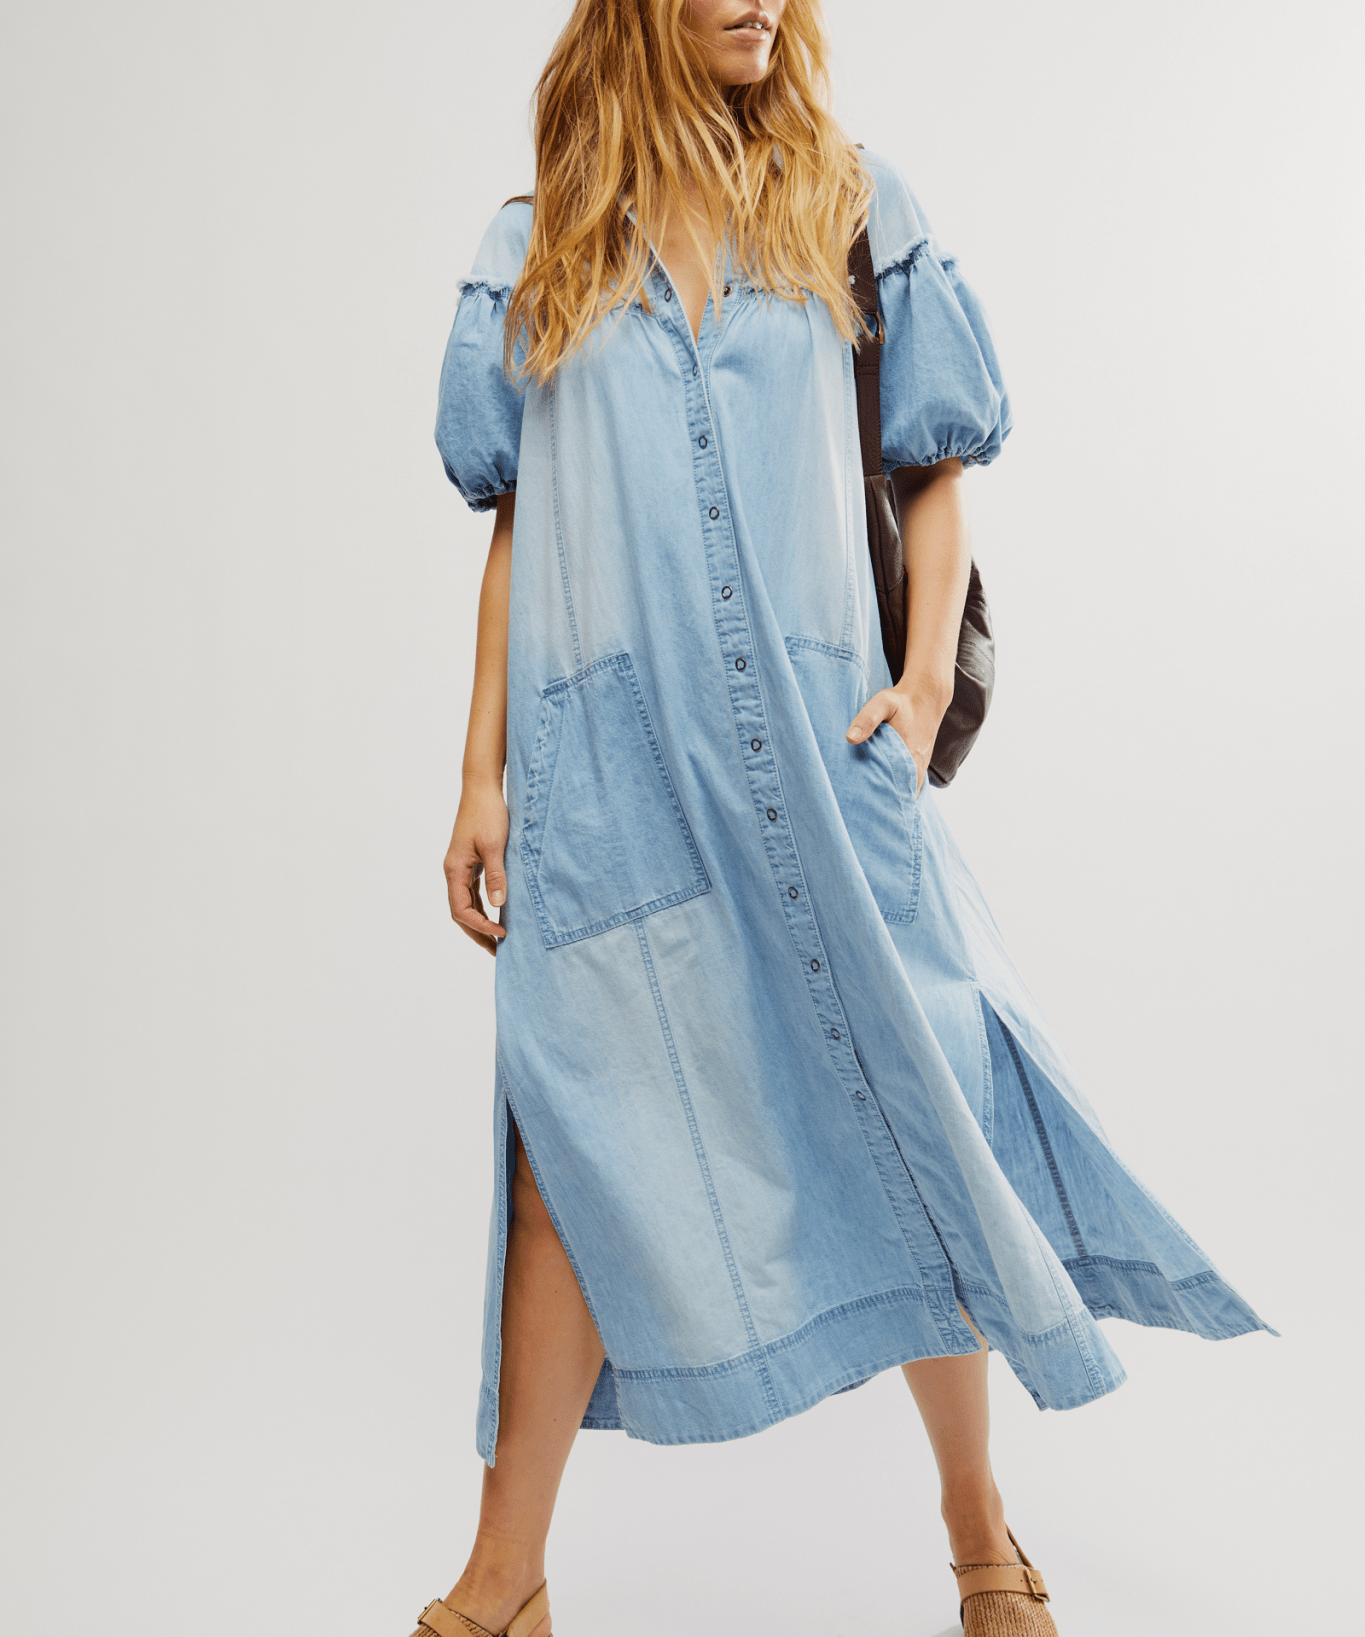 On The Road Maxi Dress by Free People - Blue Sky Fashions & Lingerie